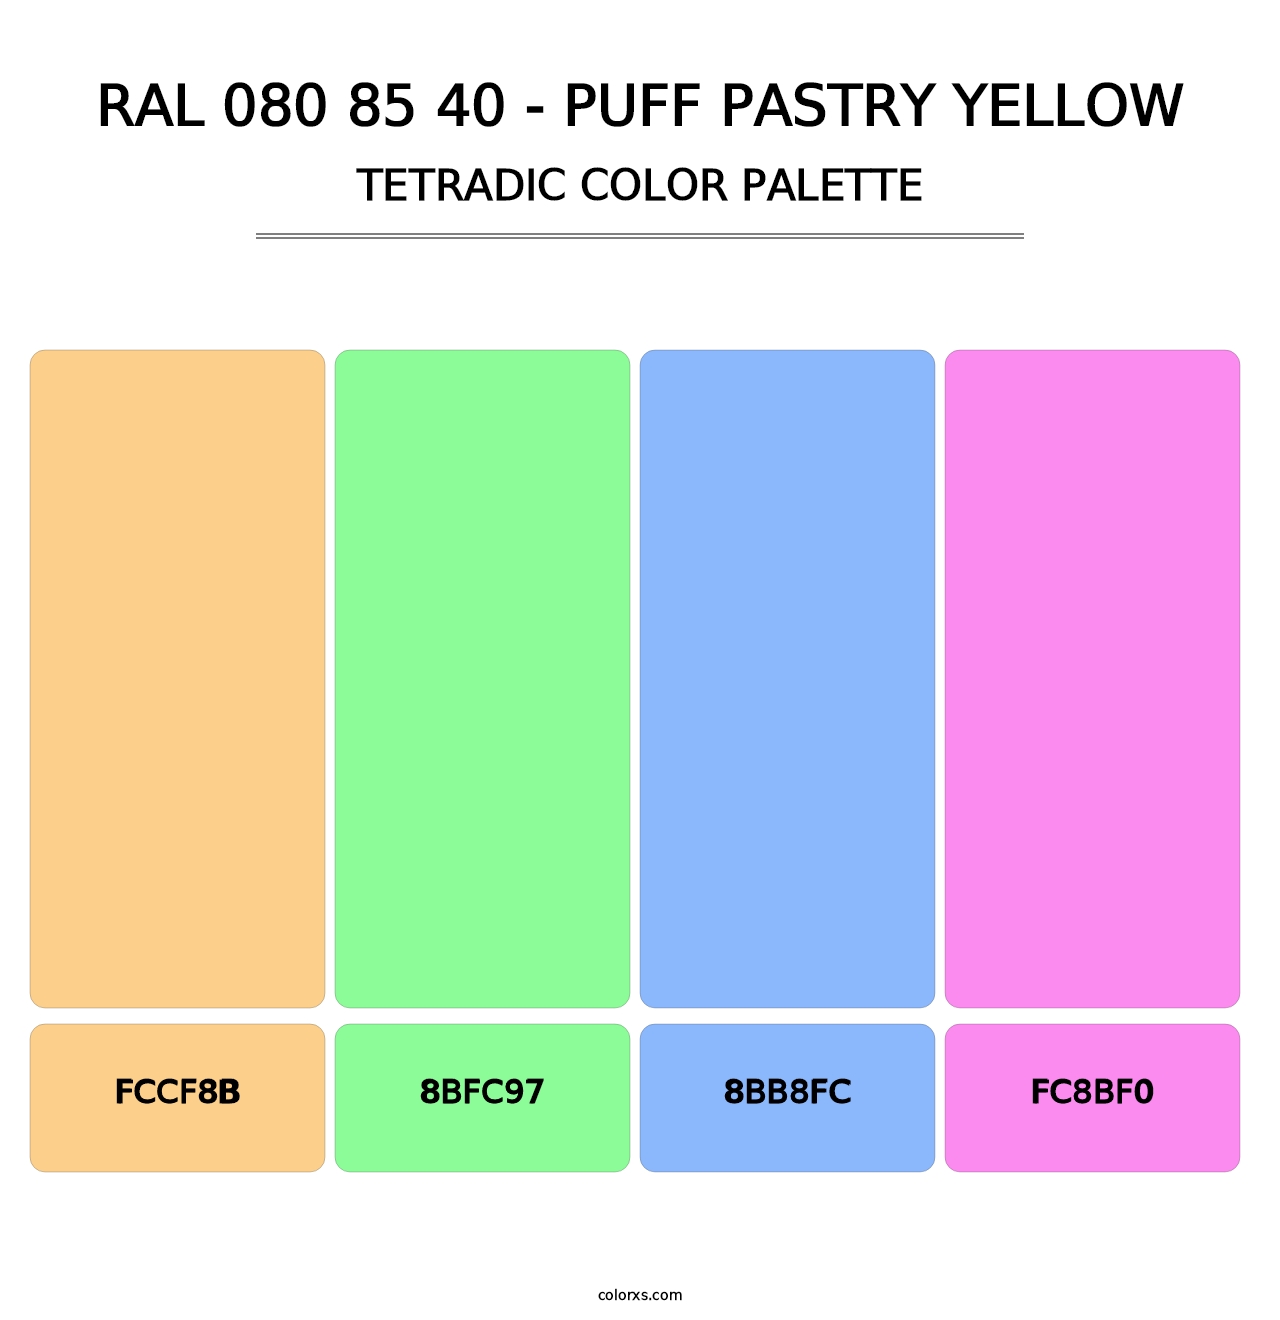 RAL 080 85 40 - Puff Pastry Yellow - Tetradic Color Palette